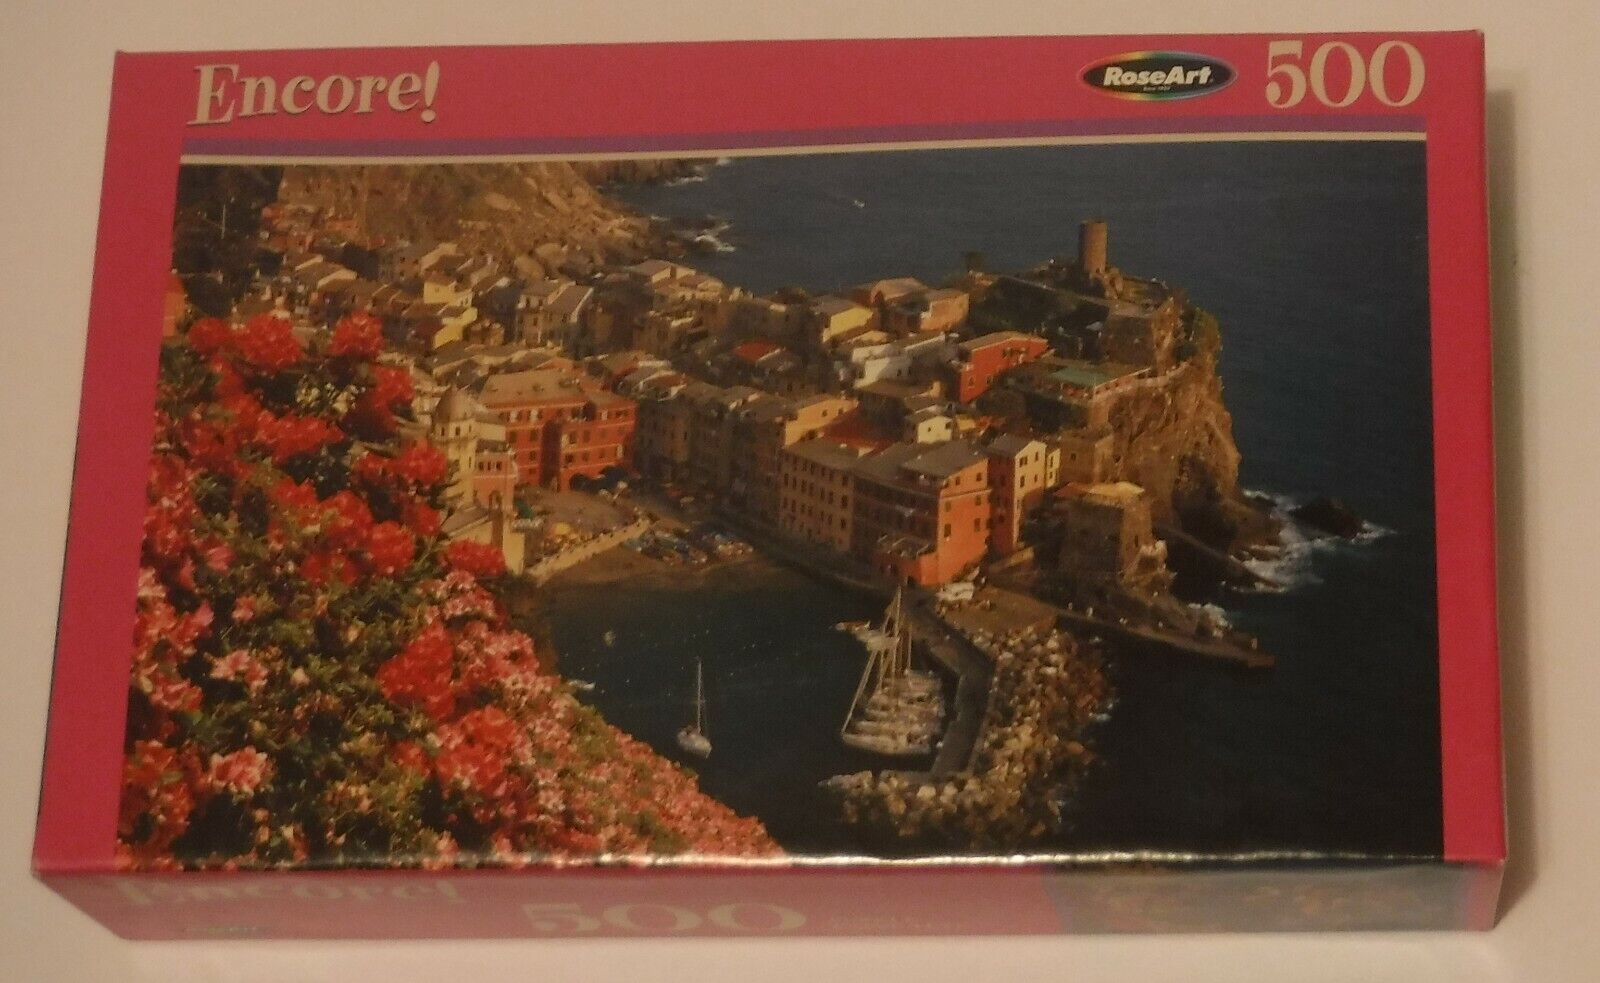 Lot of (2) 500 Piece Jigsaw Puzzle Sealed in Box Encore Puzzlebug - $13.98